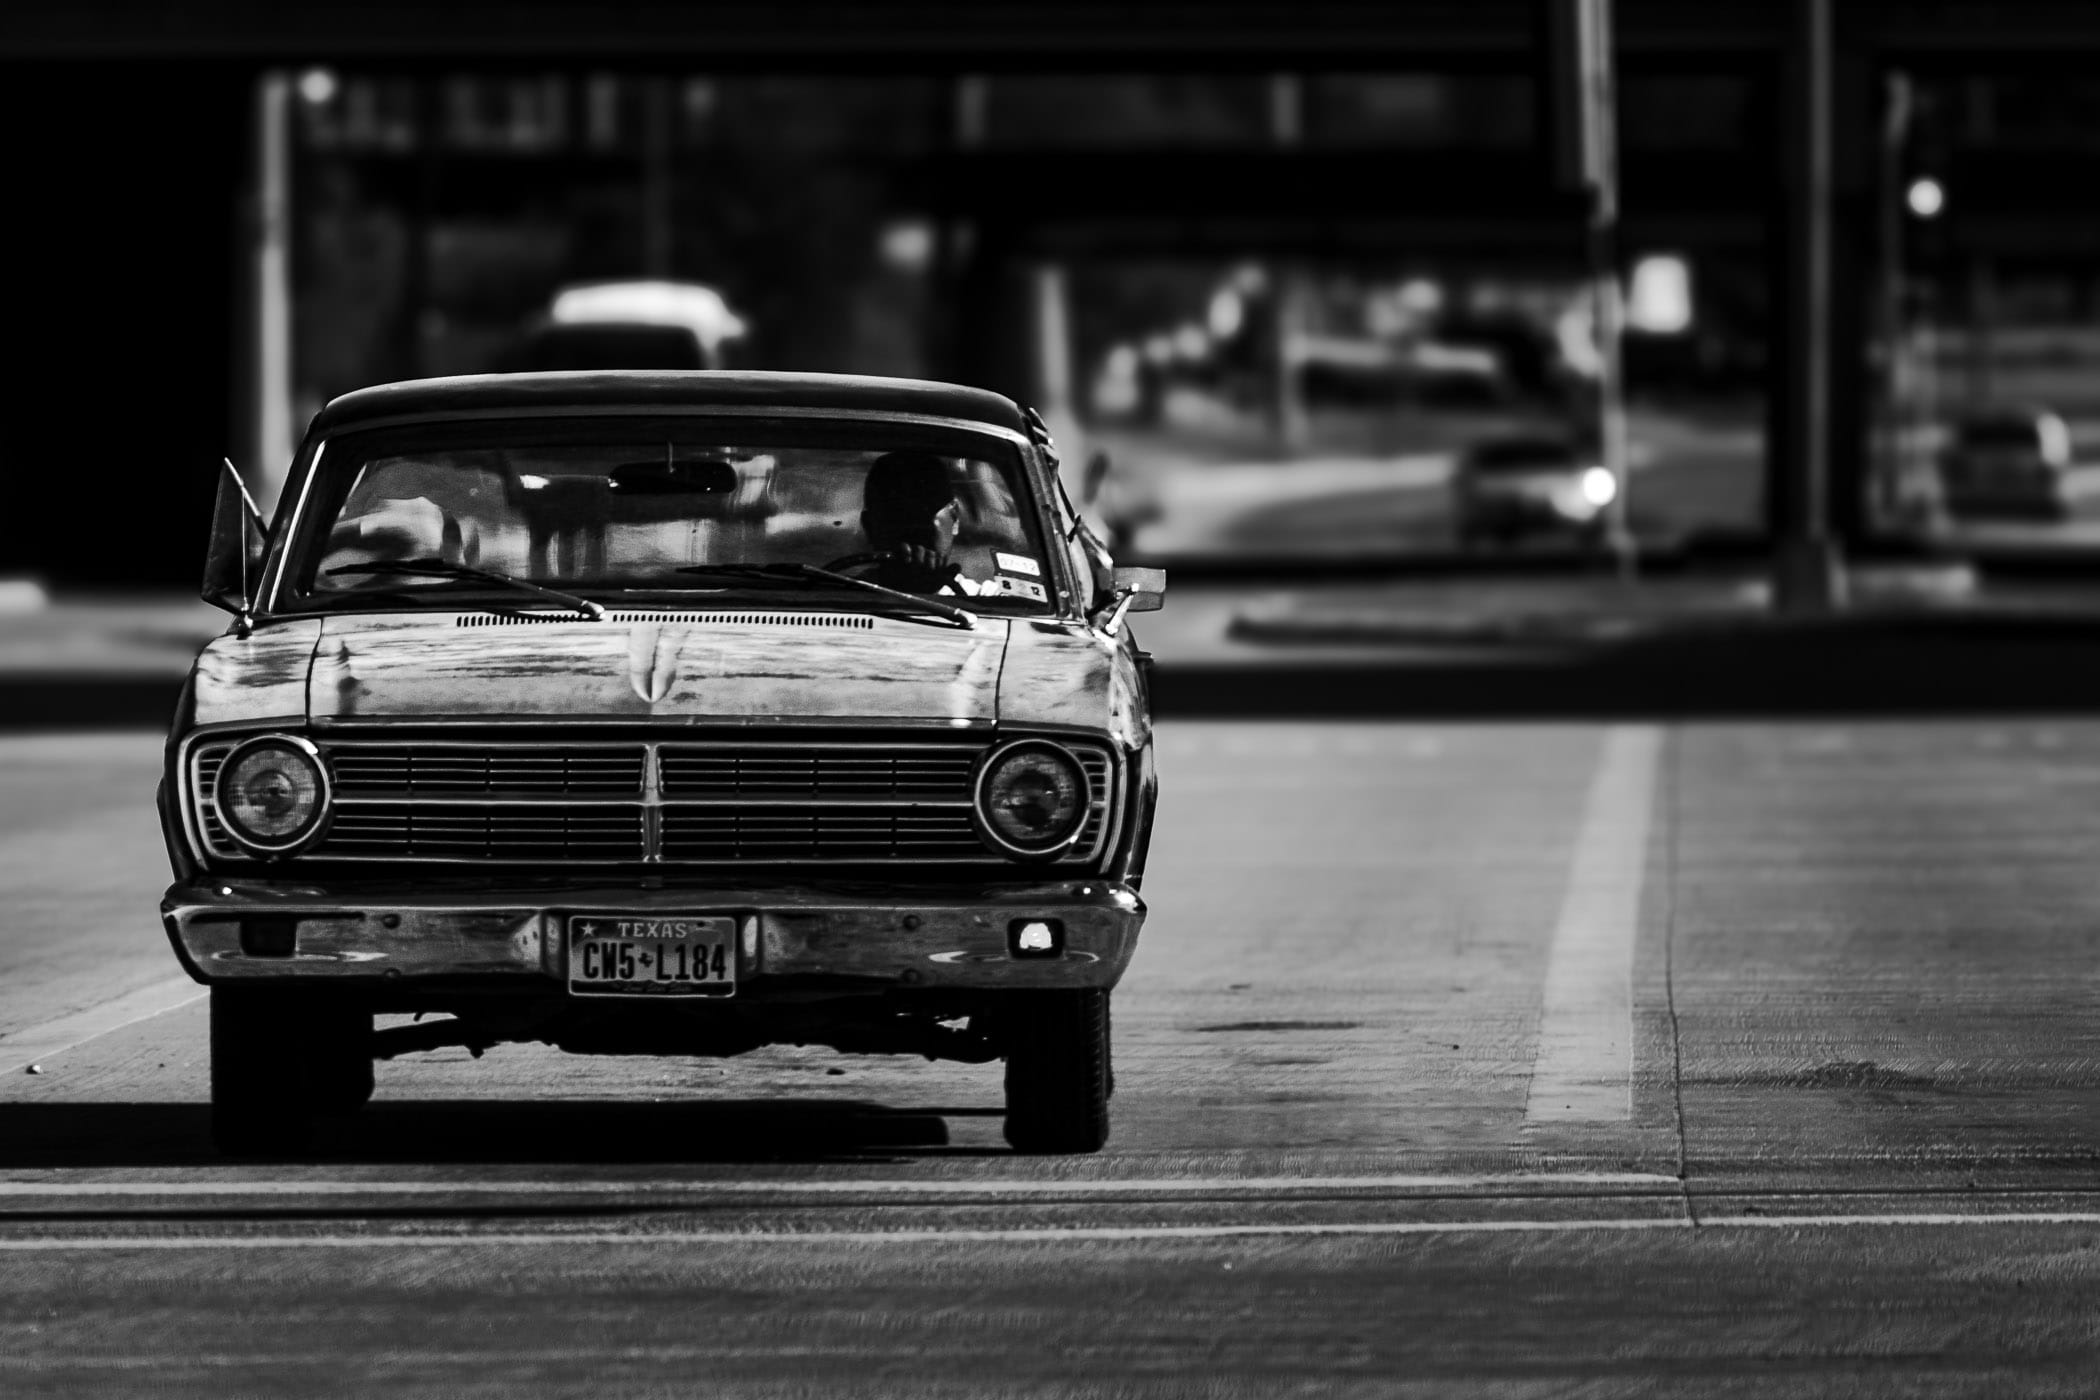 Driving a classic Ford Falcon in Dallas at I-35 and Inwood.